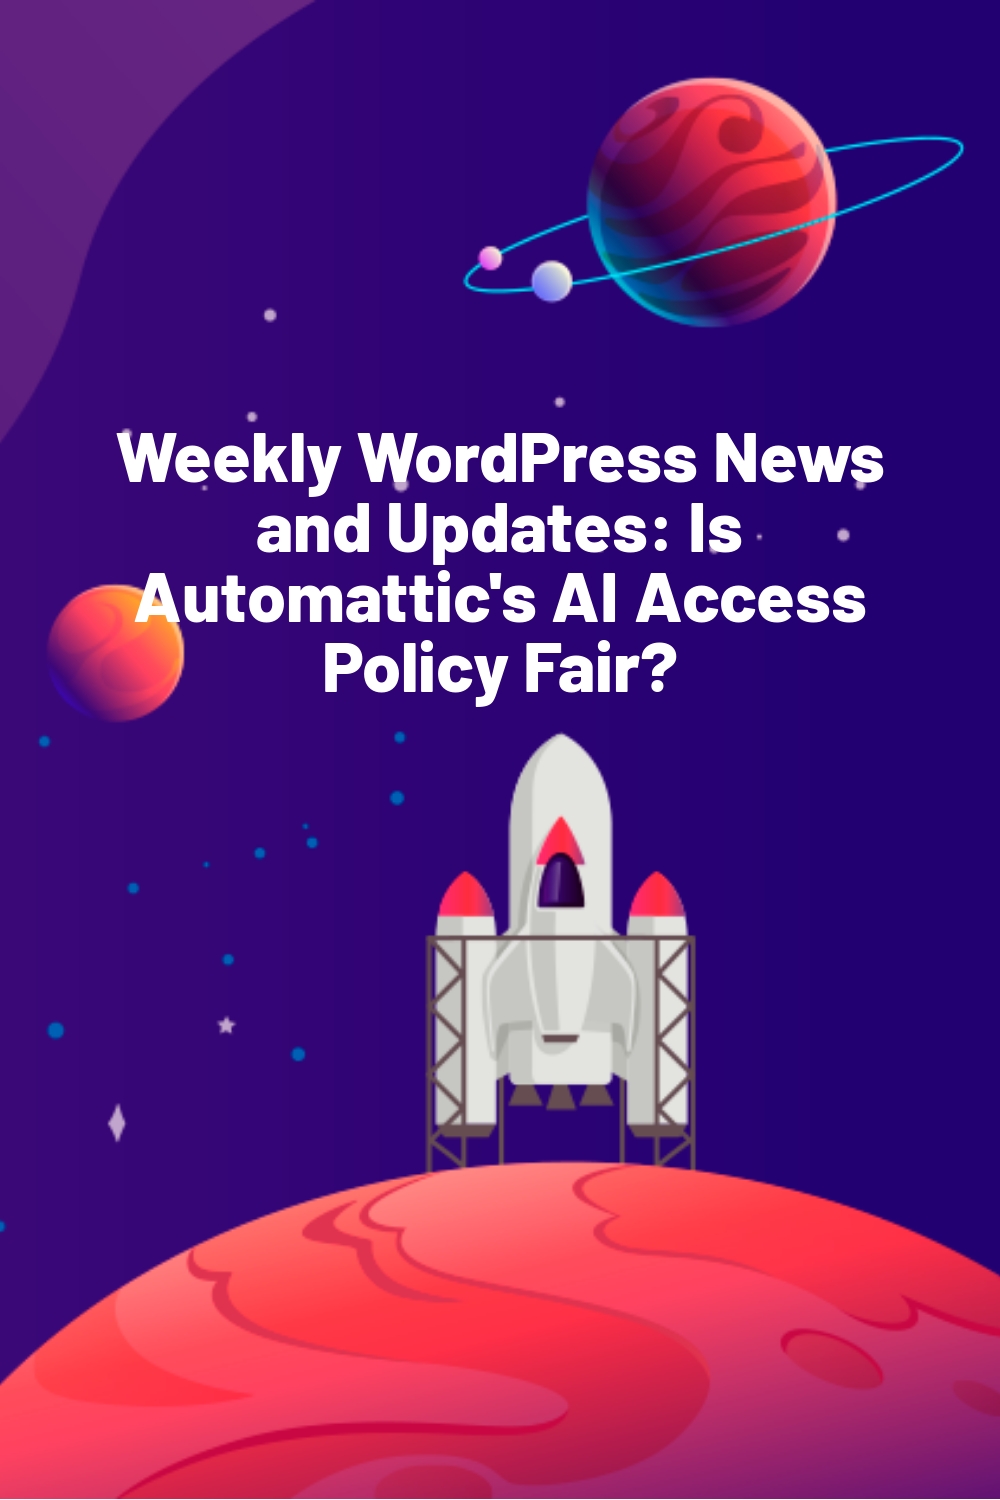 Weekly WordPress News and Updates: Is Automattic’s AI Access Policy Fair?